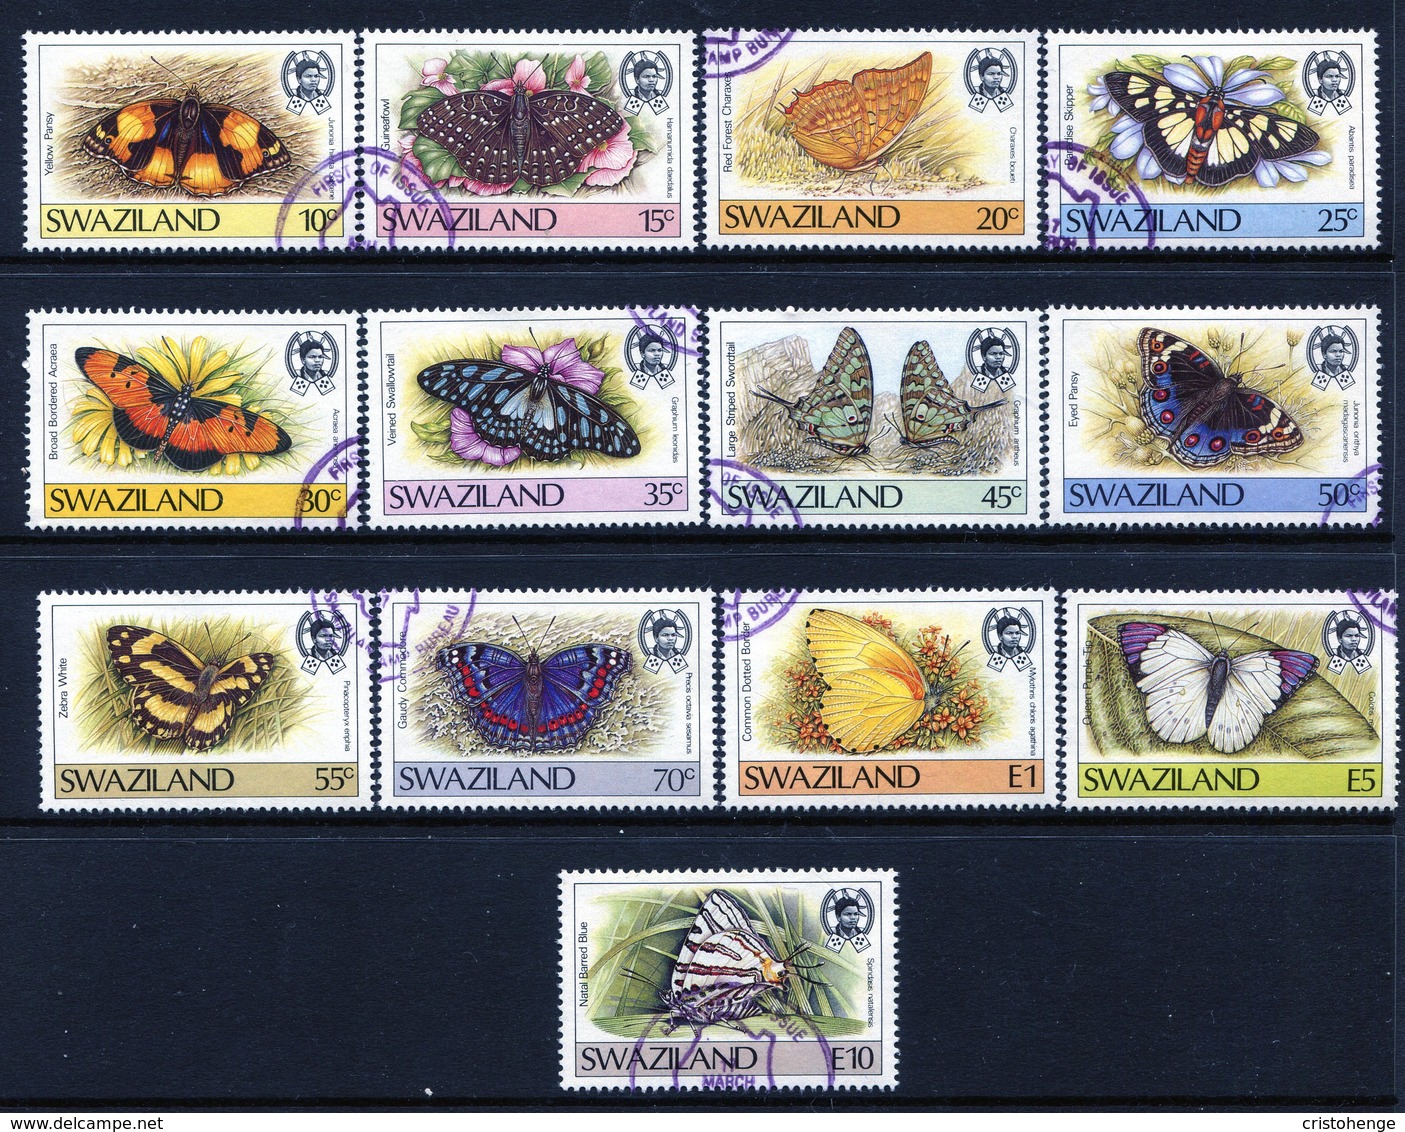 Swaziland 1987 Butterflies - 1st Issue - Set Used (SG 516-528) - Swaziland (1968-...)